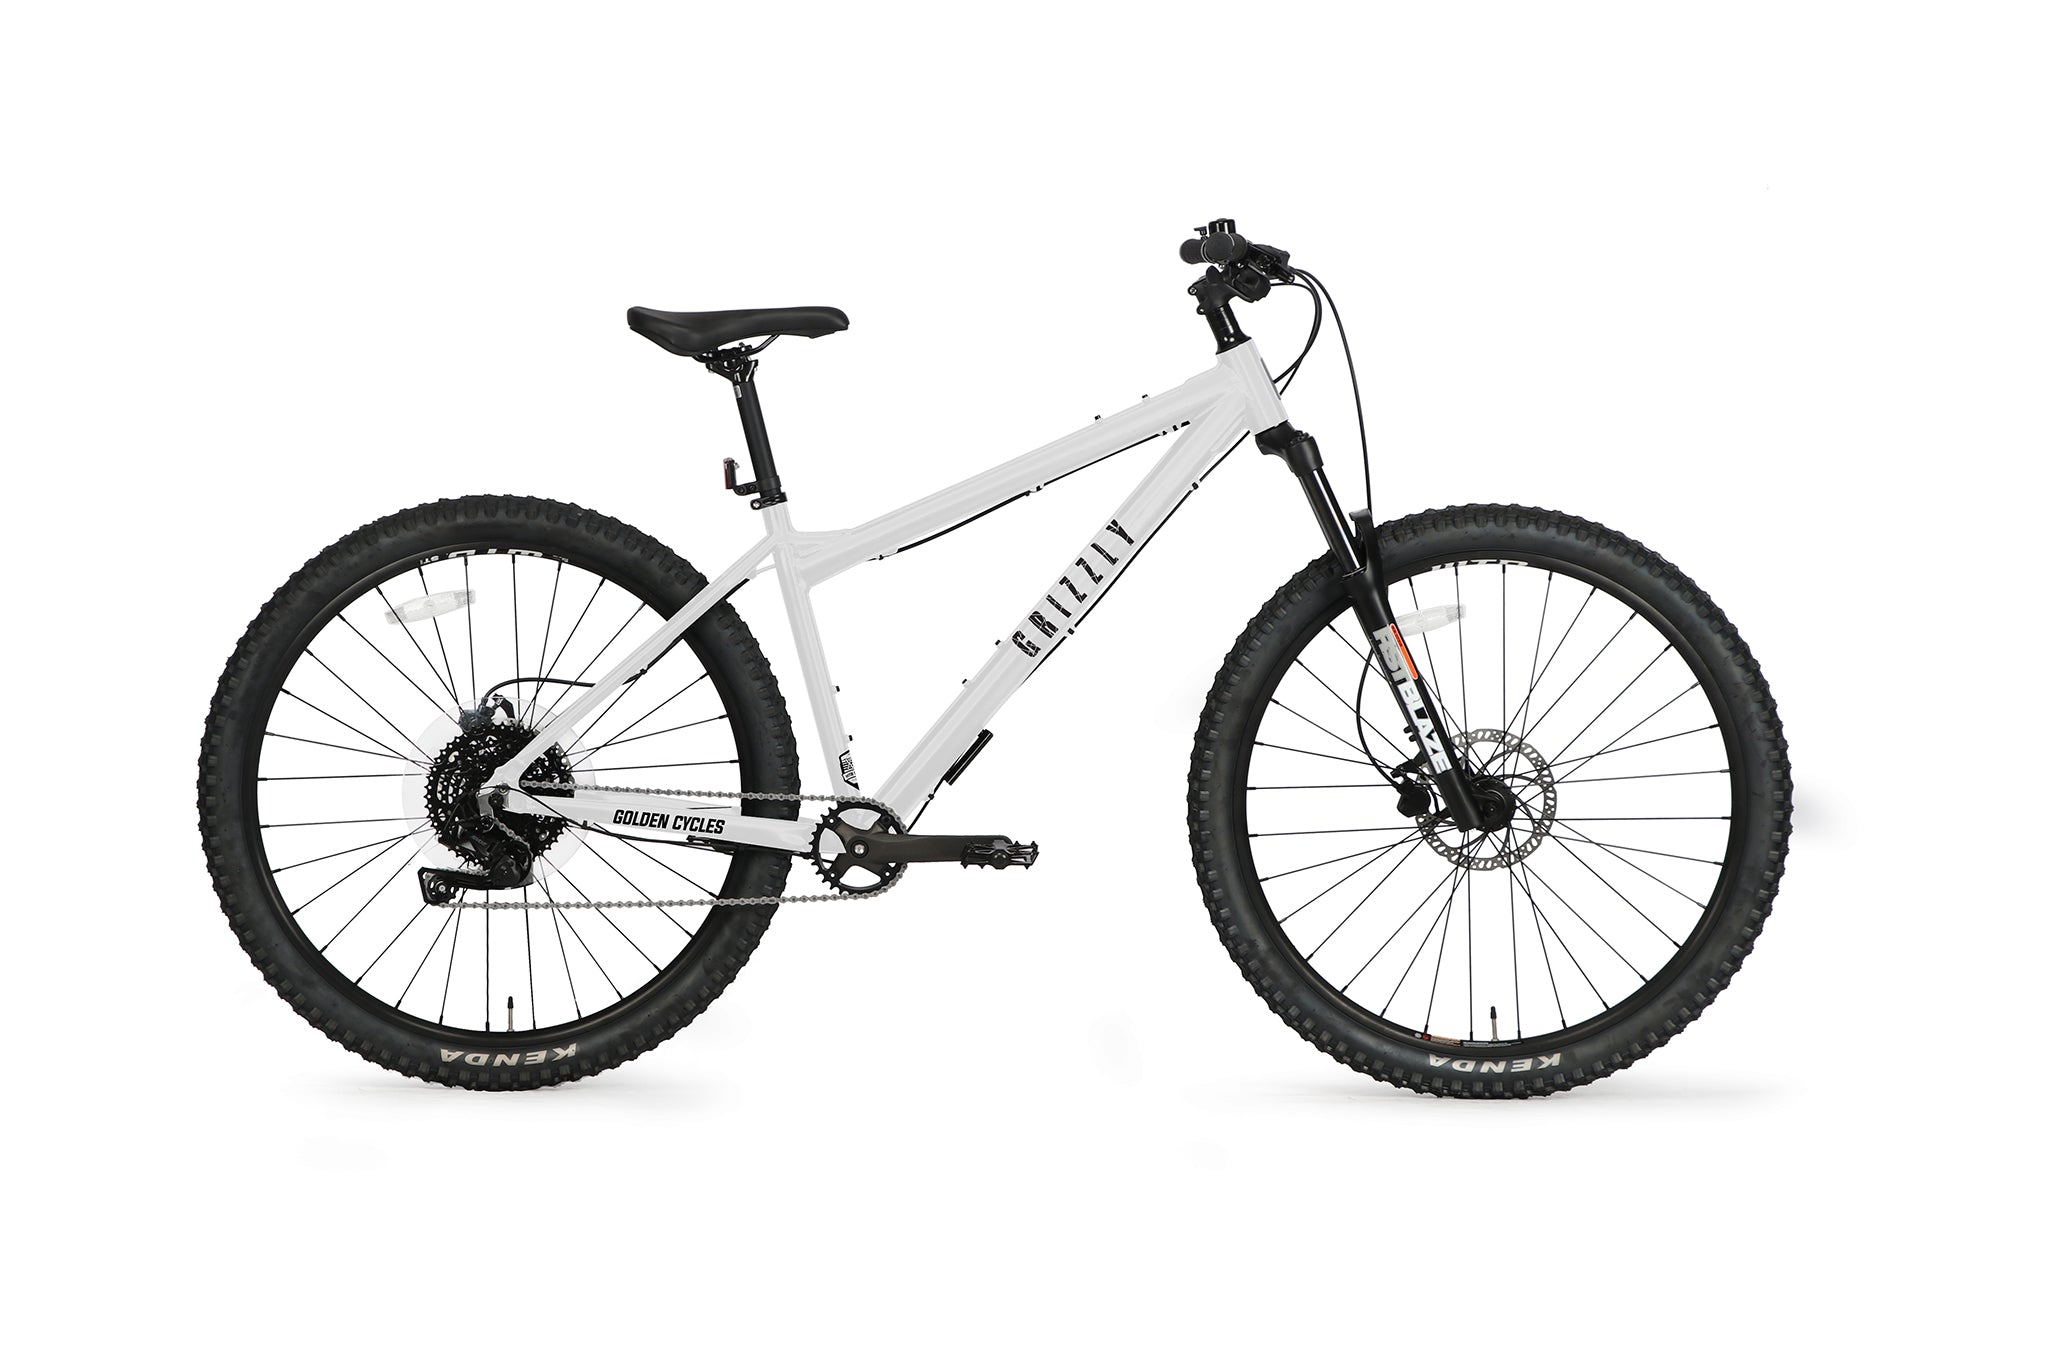 Grizzly MTB 29" - White